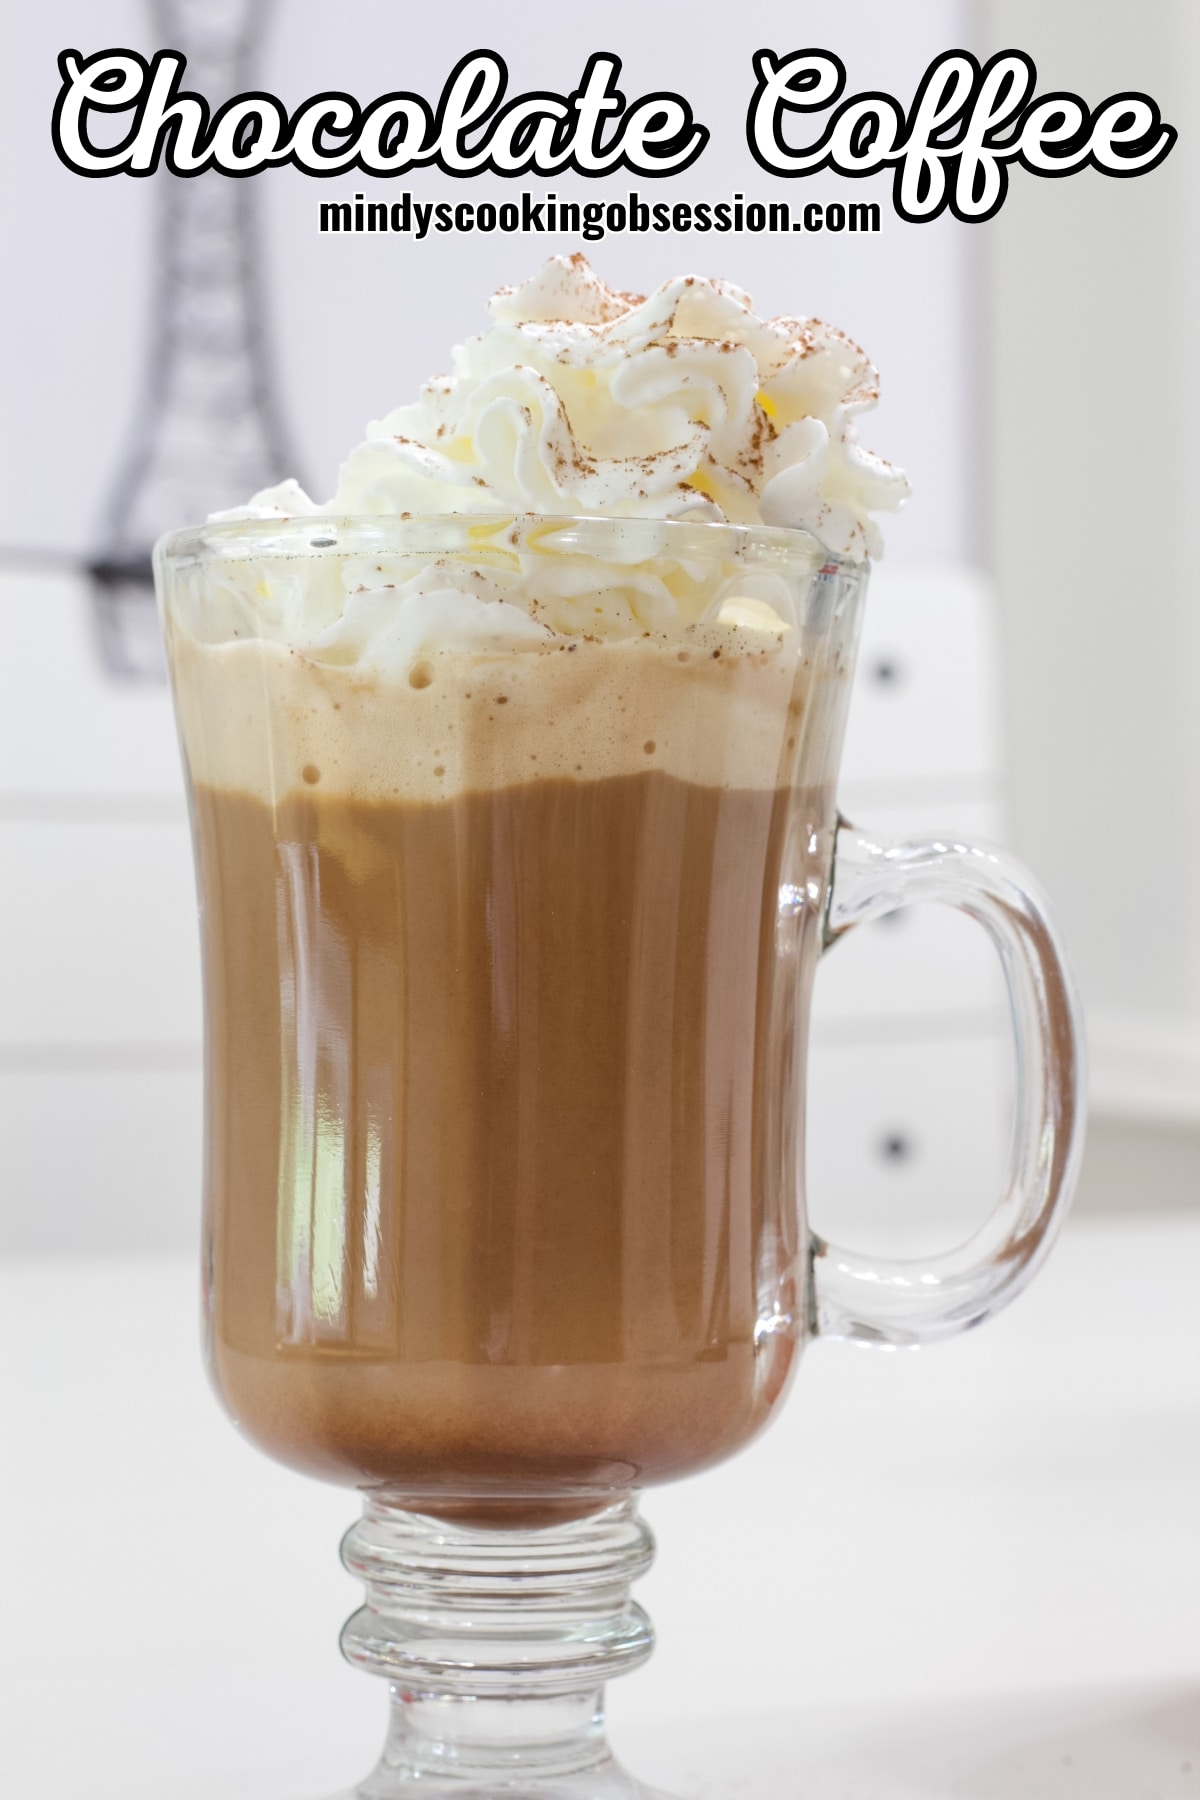 Easy Chocolate Coffee Recipe (Hot Cafe Mocha) - Mindy's Cooking